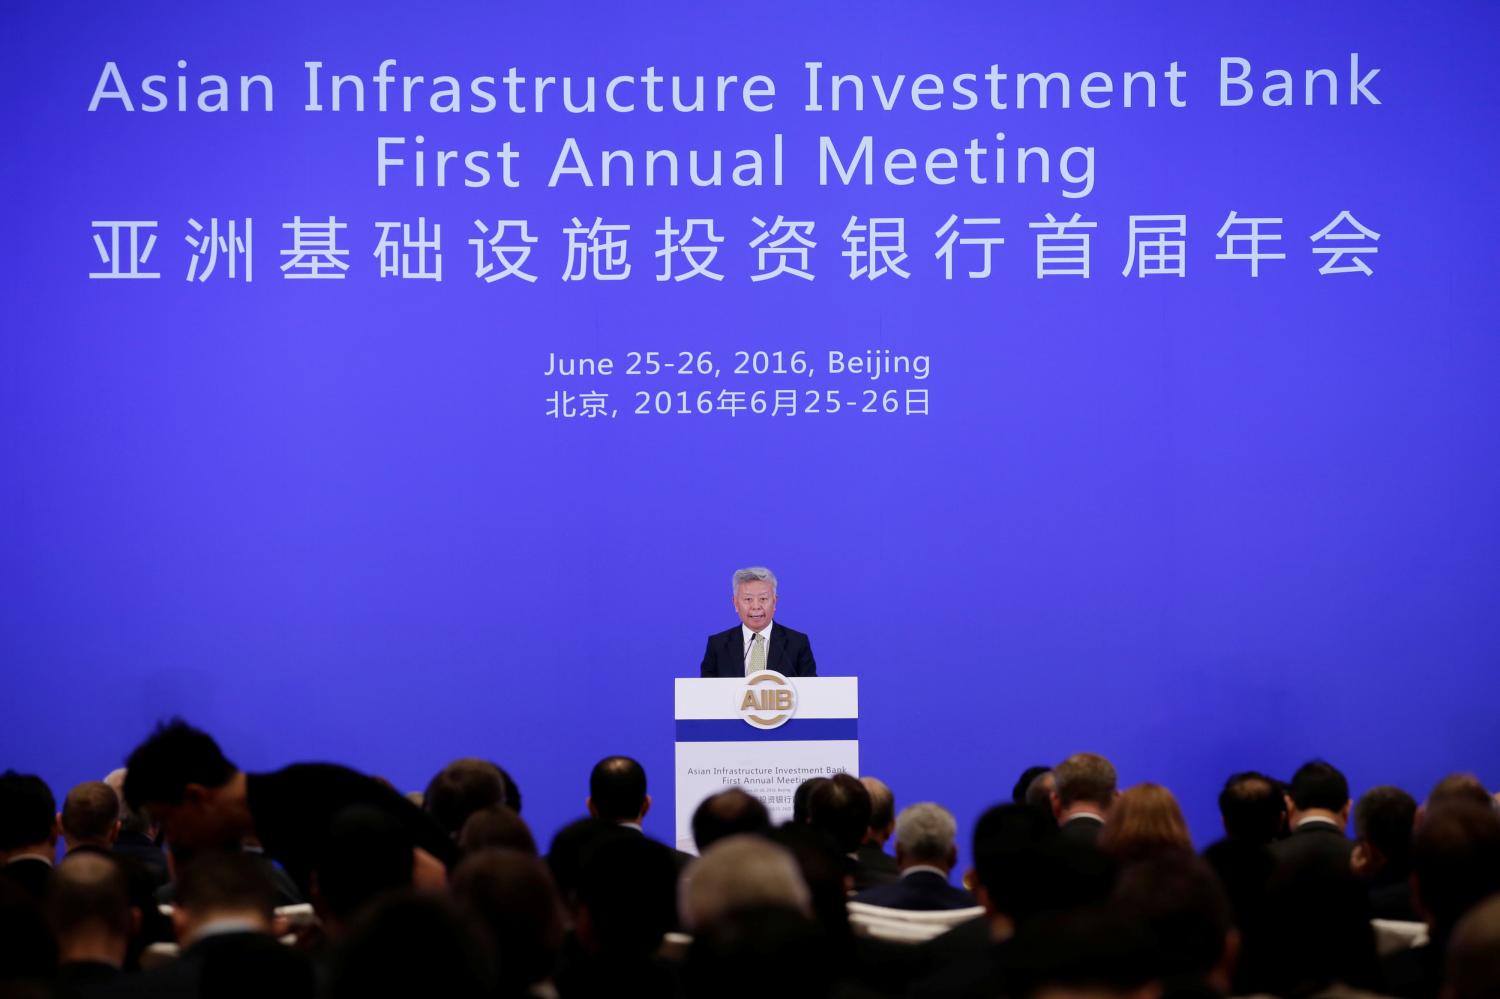 Asian Infrastructure Investment Bank (AIIB) president Jin Liqun attends the opening ceremony of the first annual meeting of AIIB in Beijing, China, June 25, 2016. REUTERS/Jason Lee - RTX2I3RA